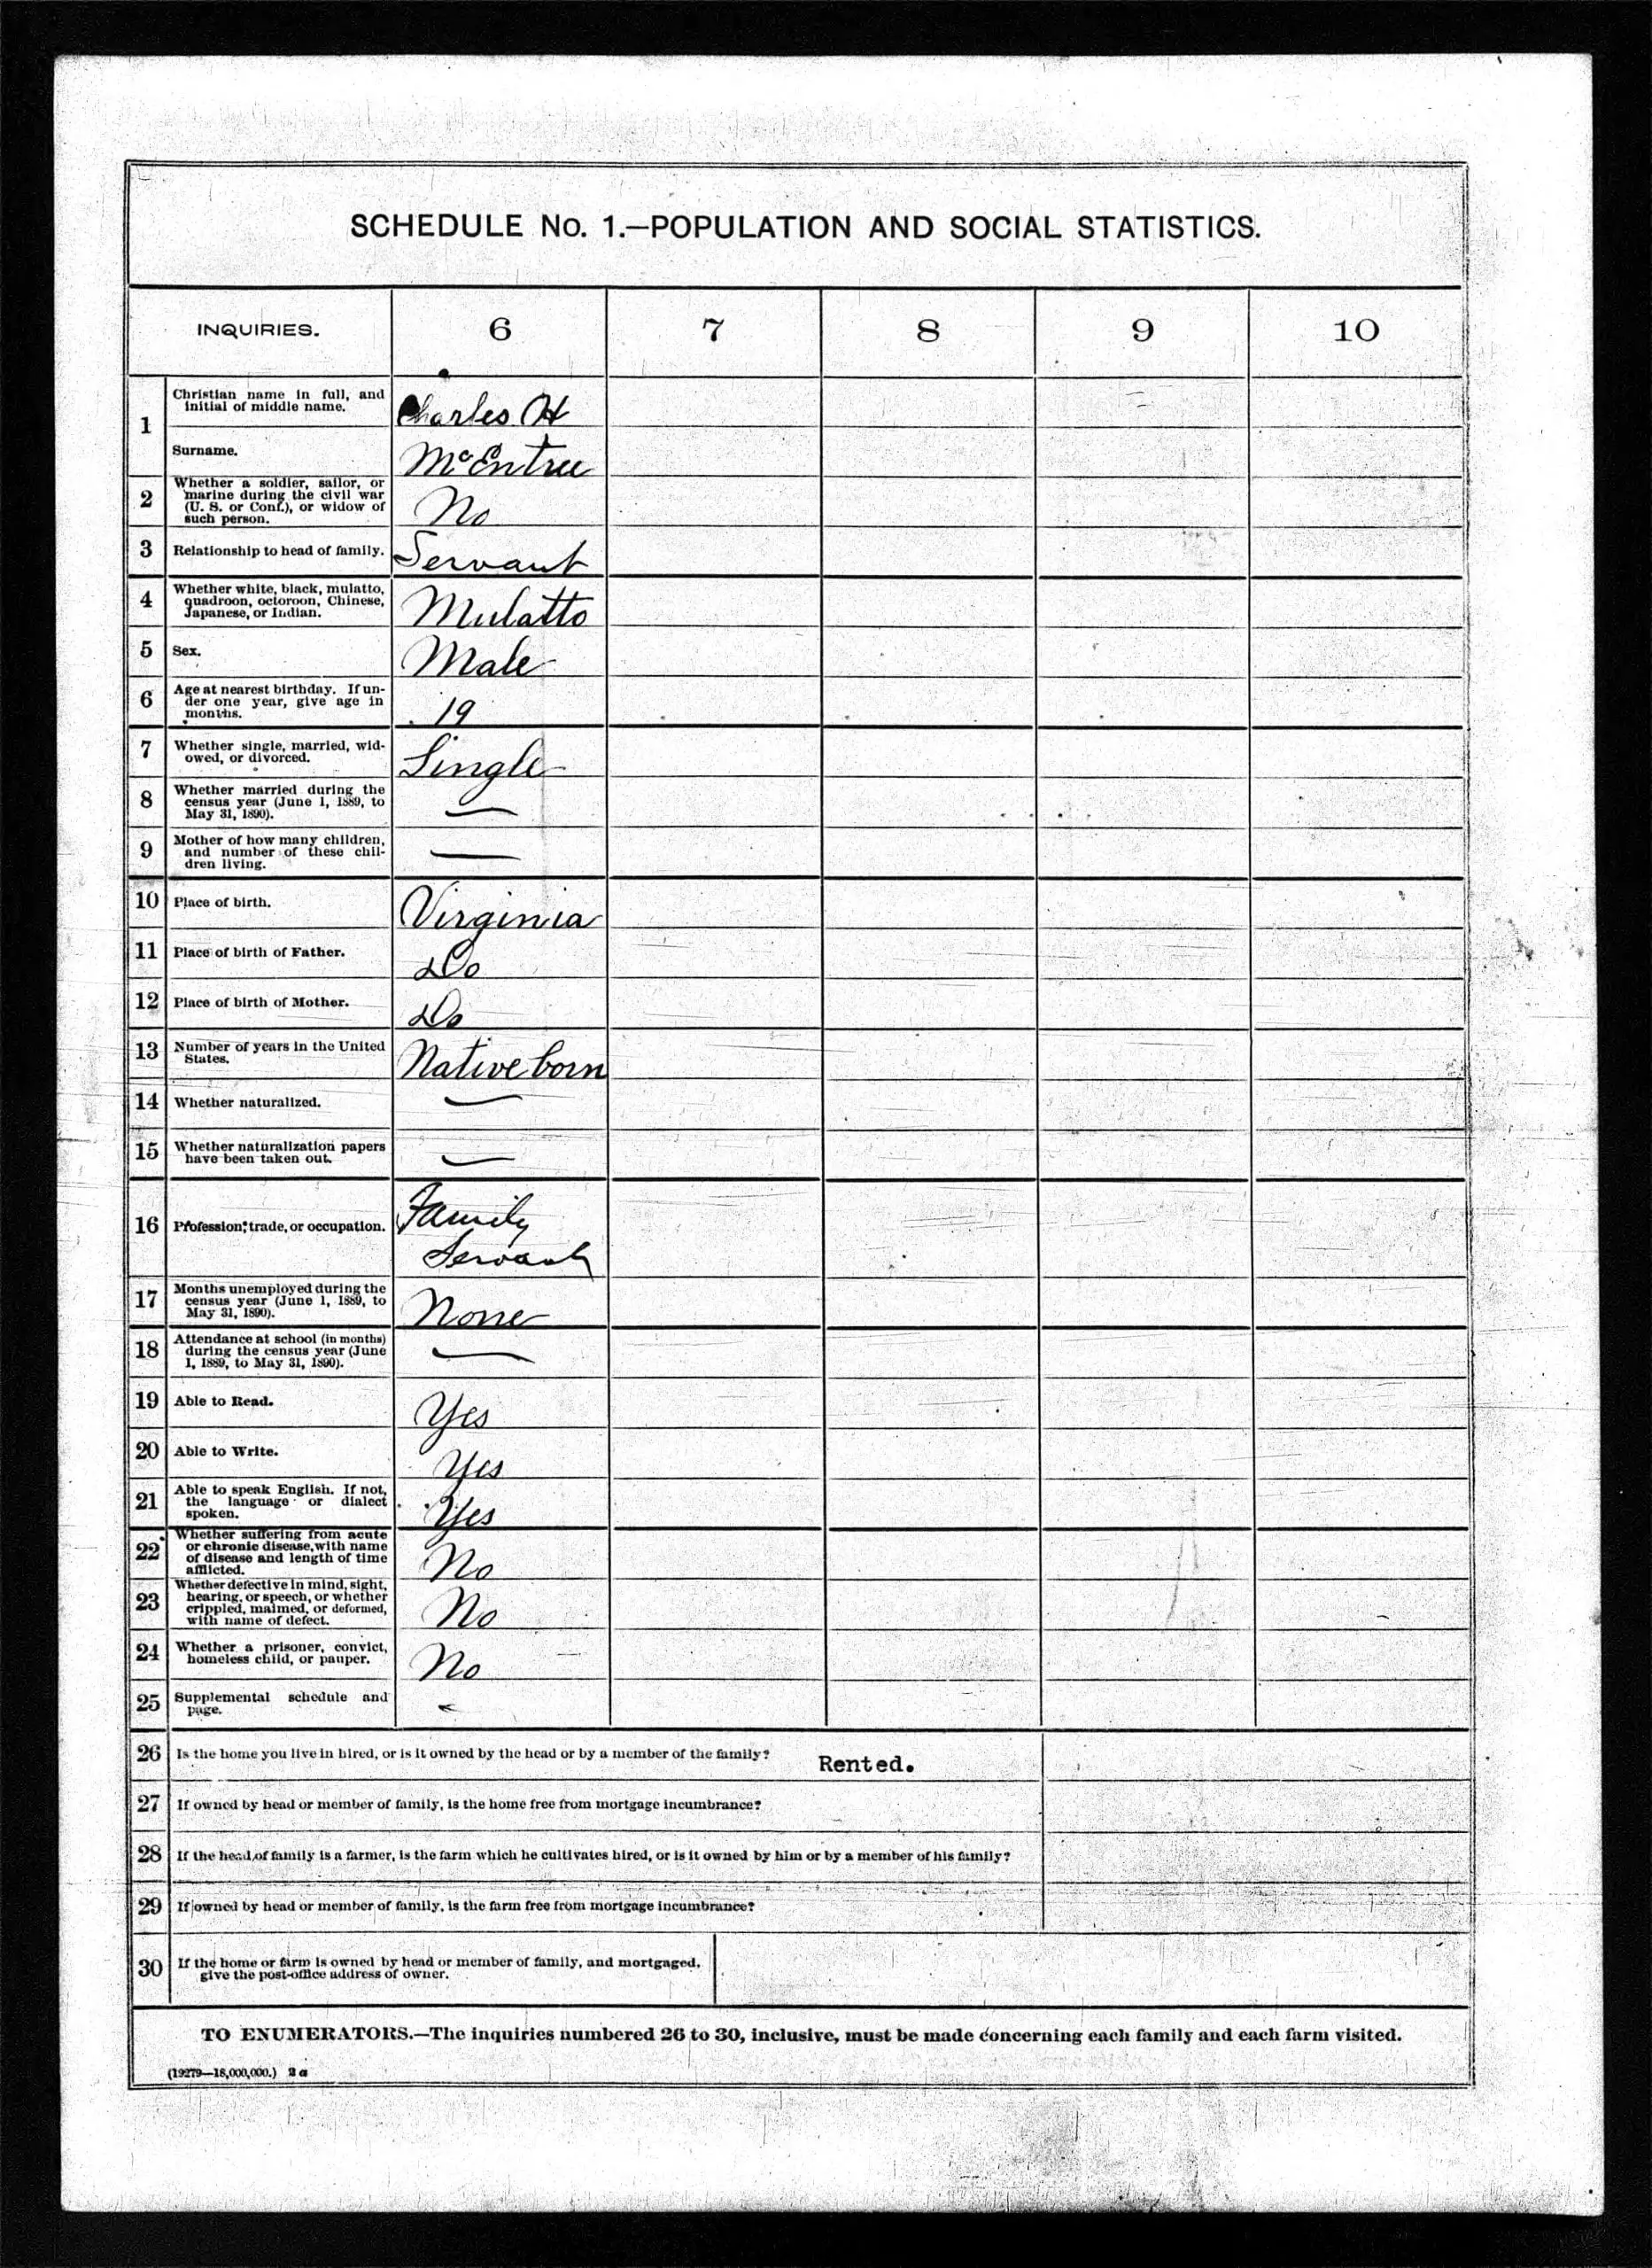 The Pennebaker family in the 1890 U.S. Census (Ancestry.com)